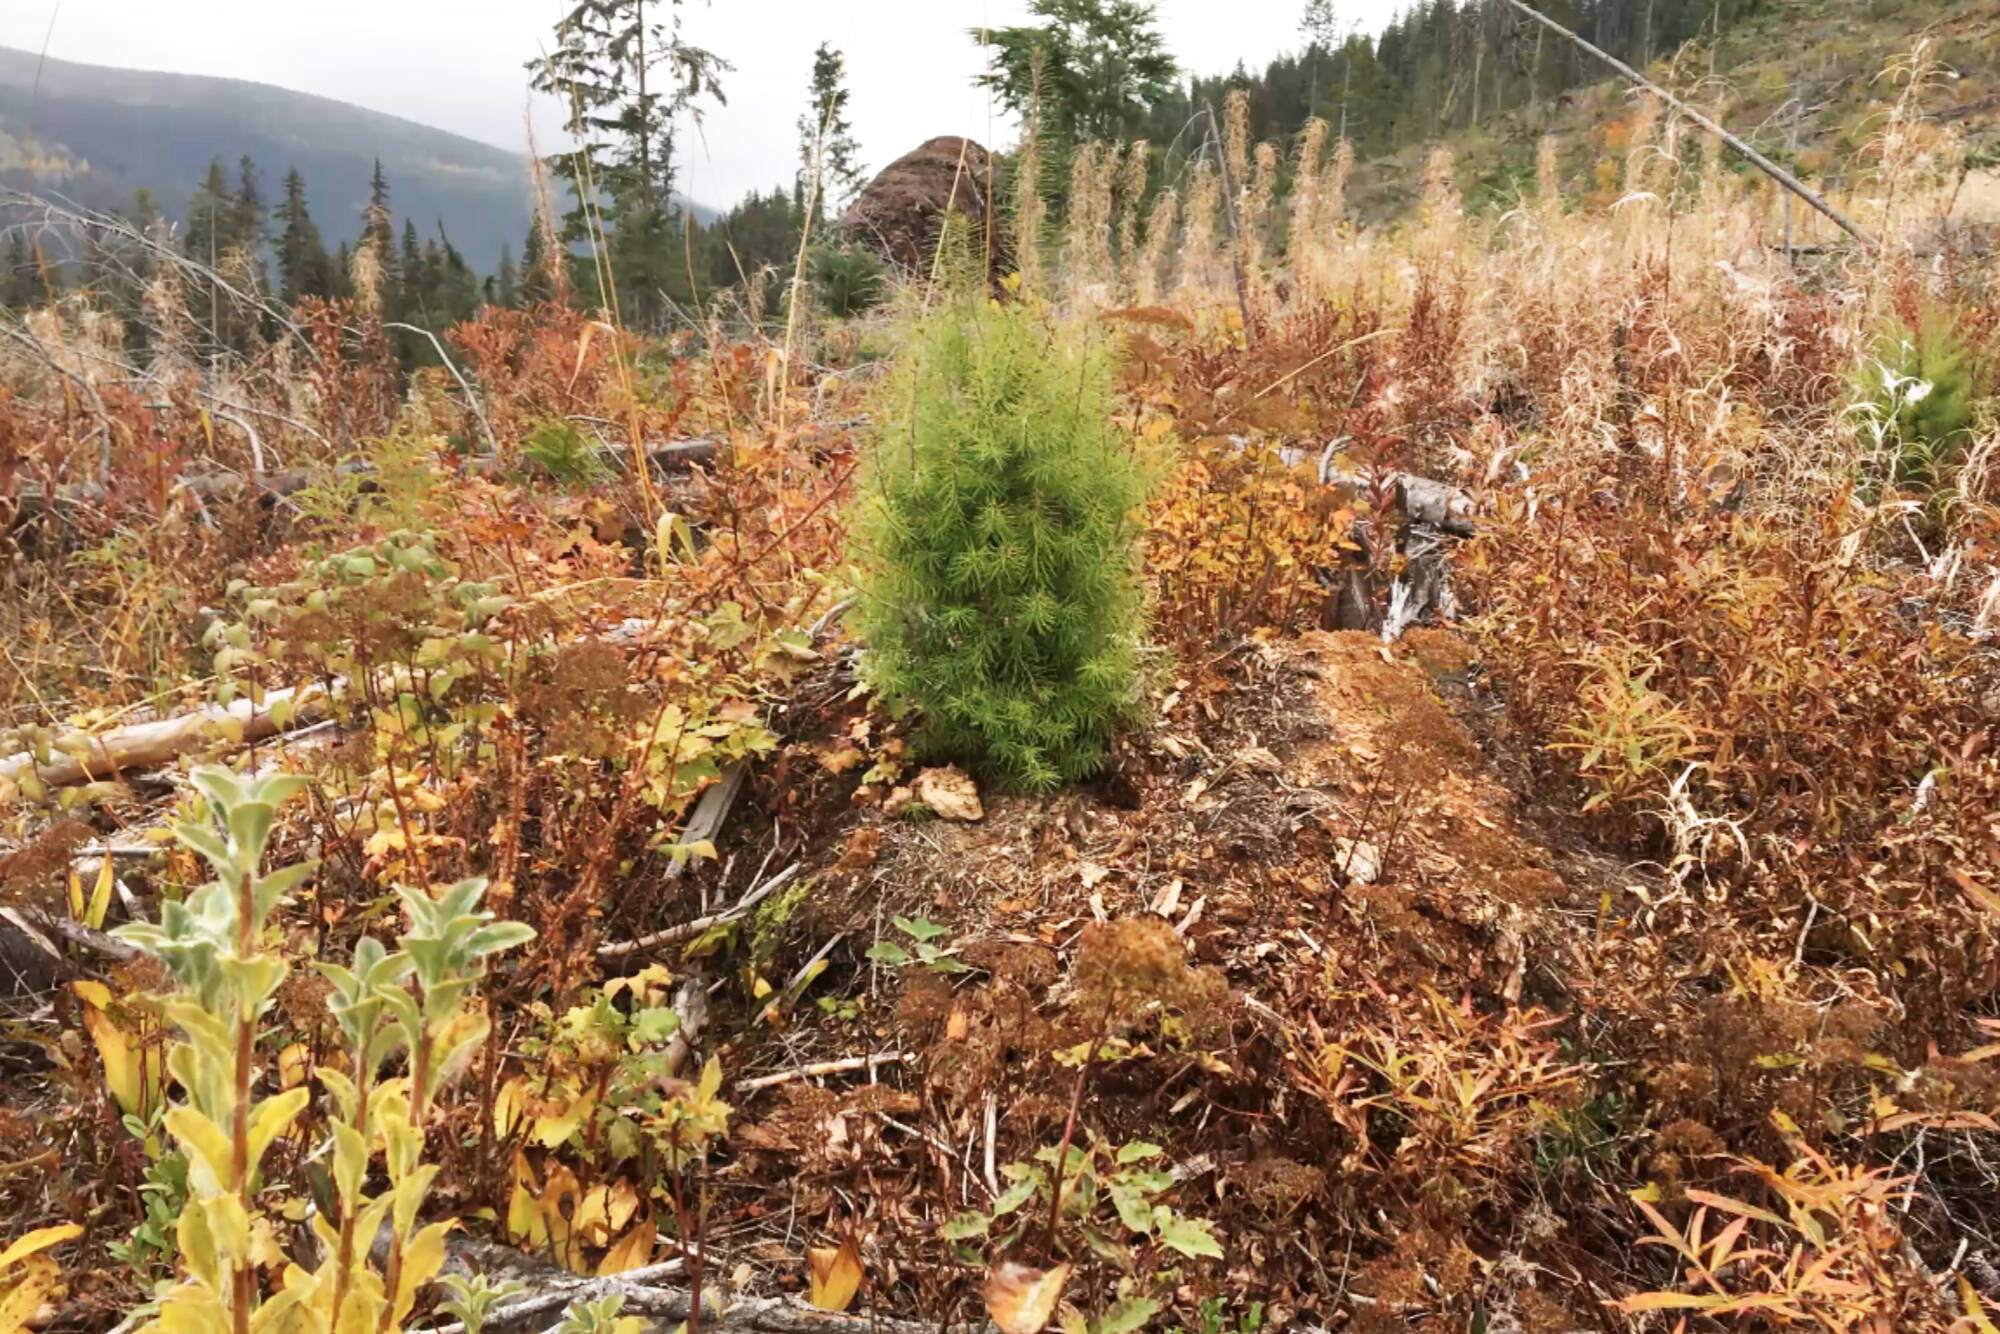 Pacific Woodtech’s Scott King shared this image of a ‘healthy, happy, climatically adapted’ Douglas fir growing at a test site in Golden during presentation to the Columbia Shuswap Regional Board on Jan. 19, 2023. (Pacific Woodtech/Scott King photo)